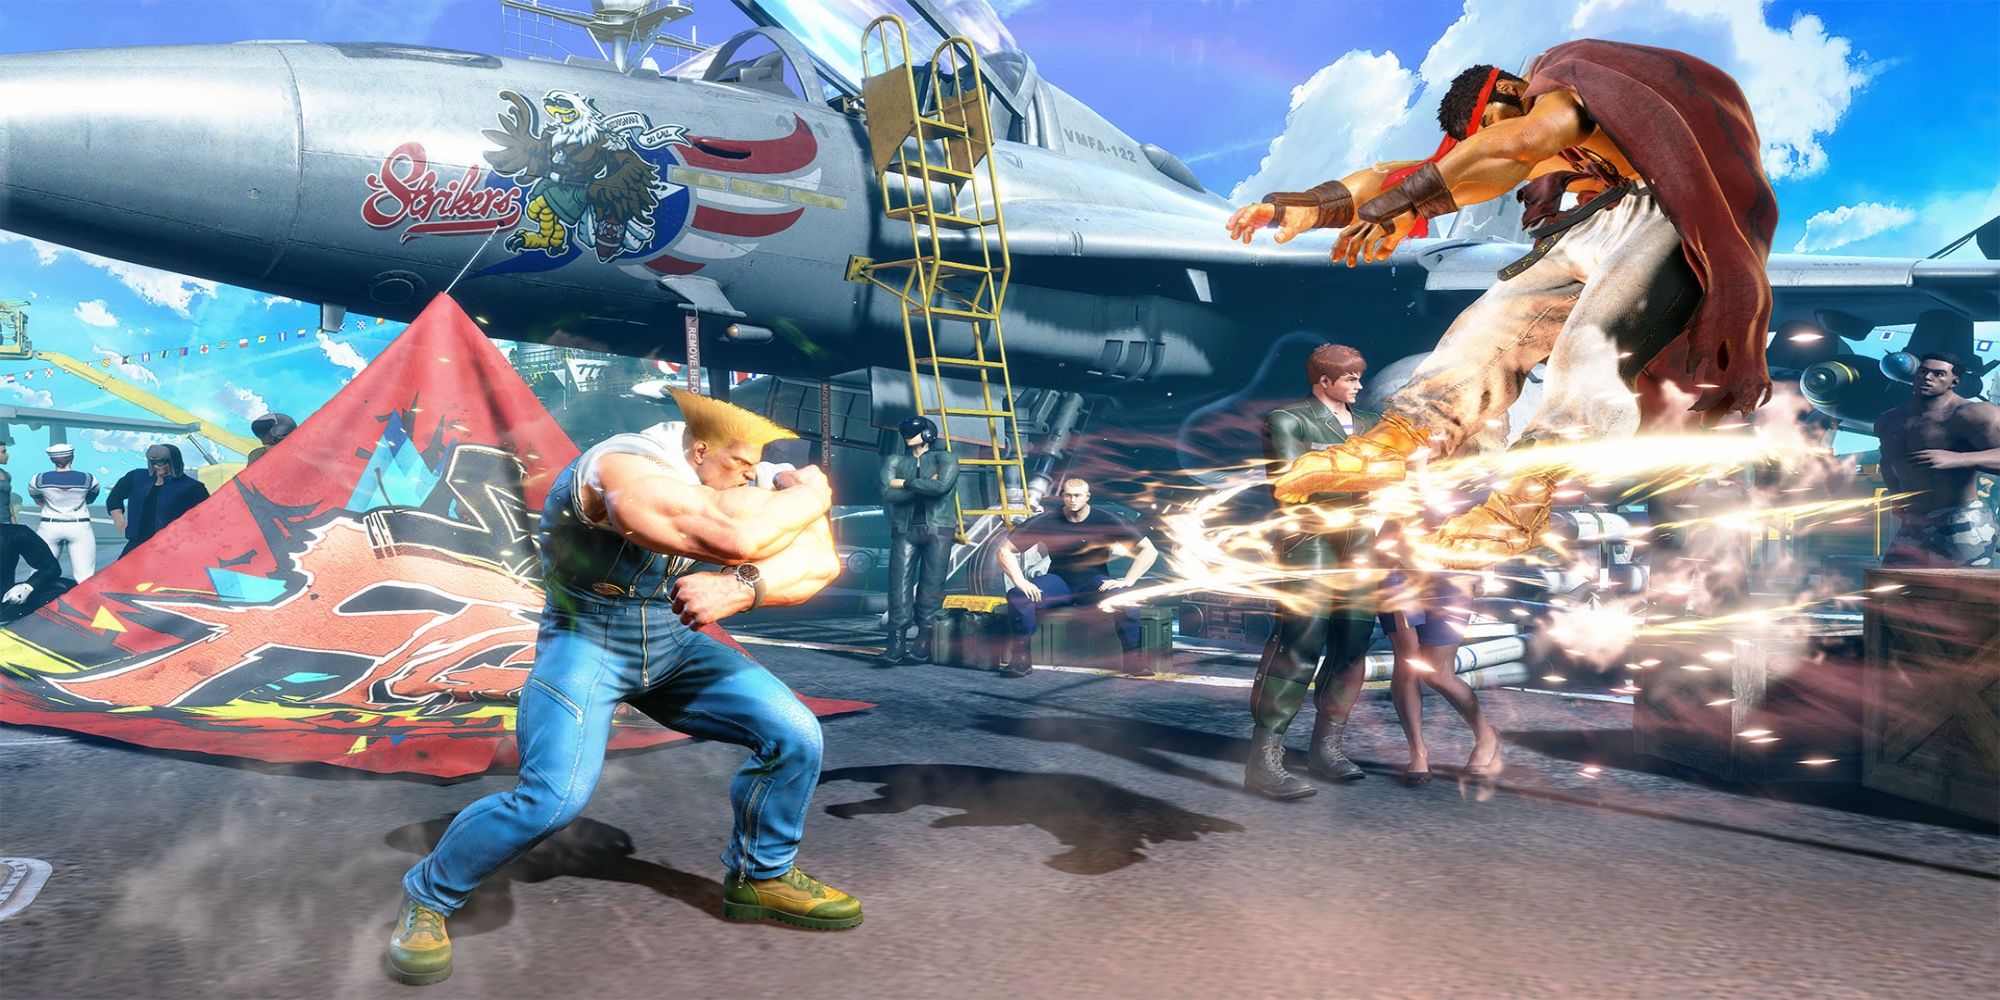 Guile uses Sonic Boom to hit Ryu from mid-range